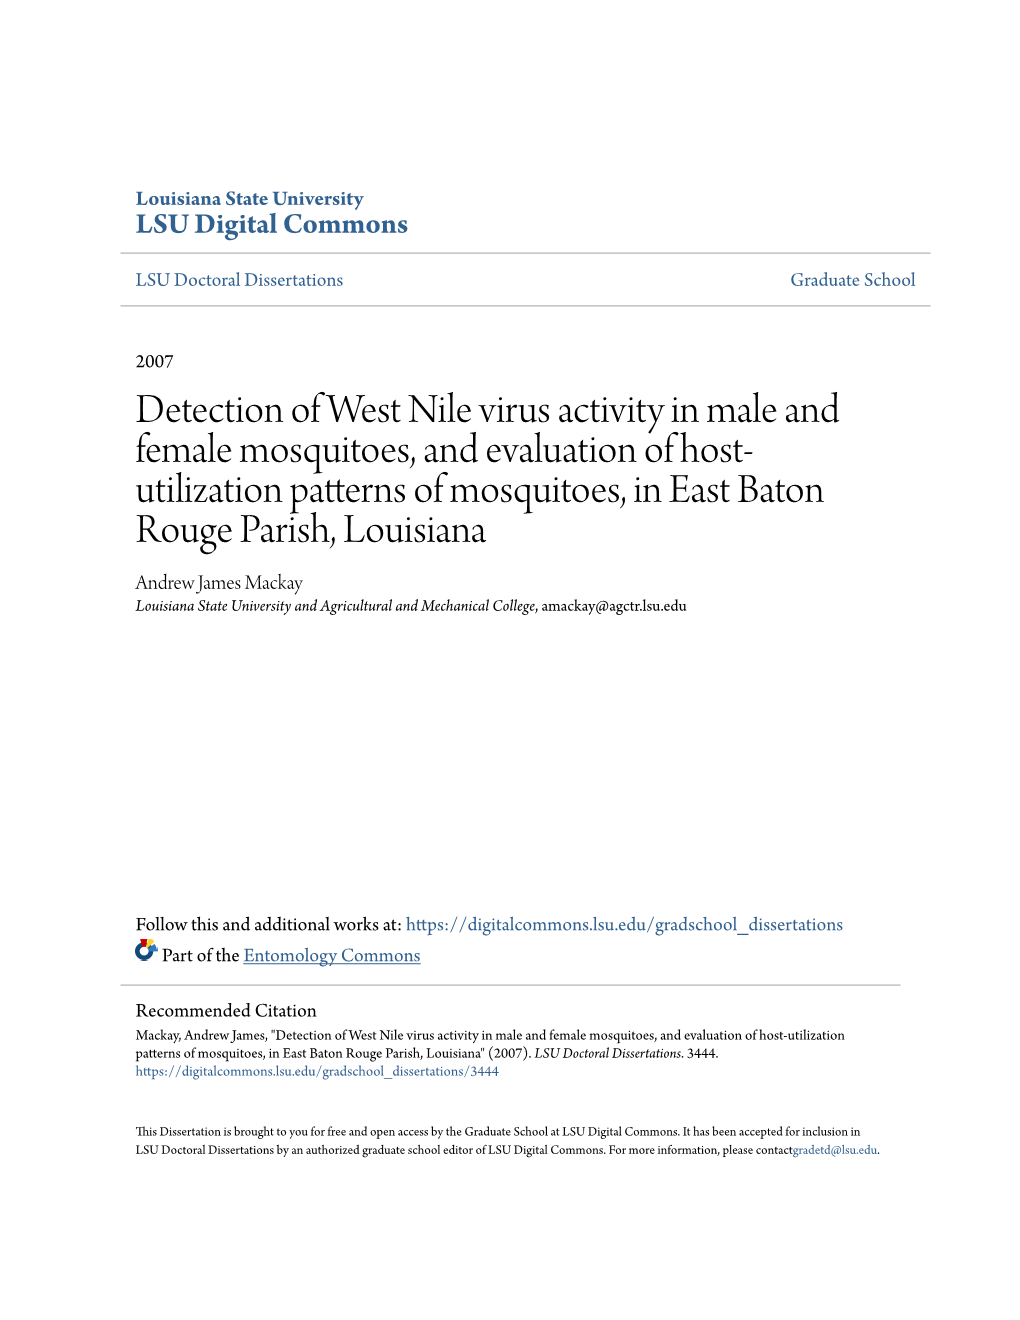 Detection of West Nile Virus Activity in Male and Female Mosquitoes, and Evaluation of Host-Utilization Patterns of Mosquitoes